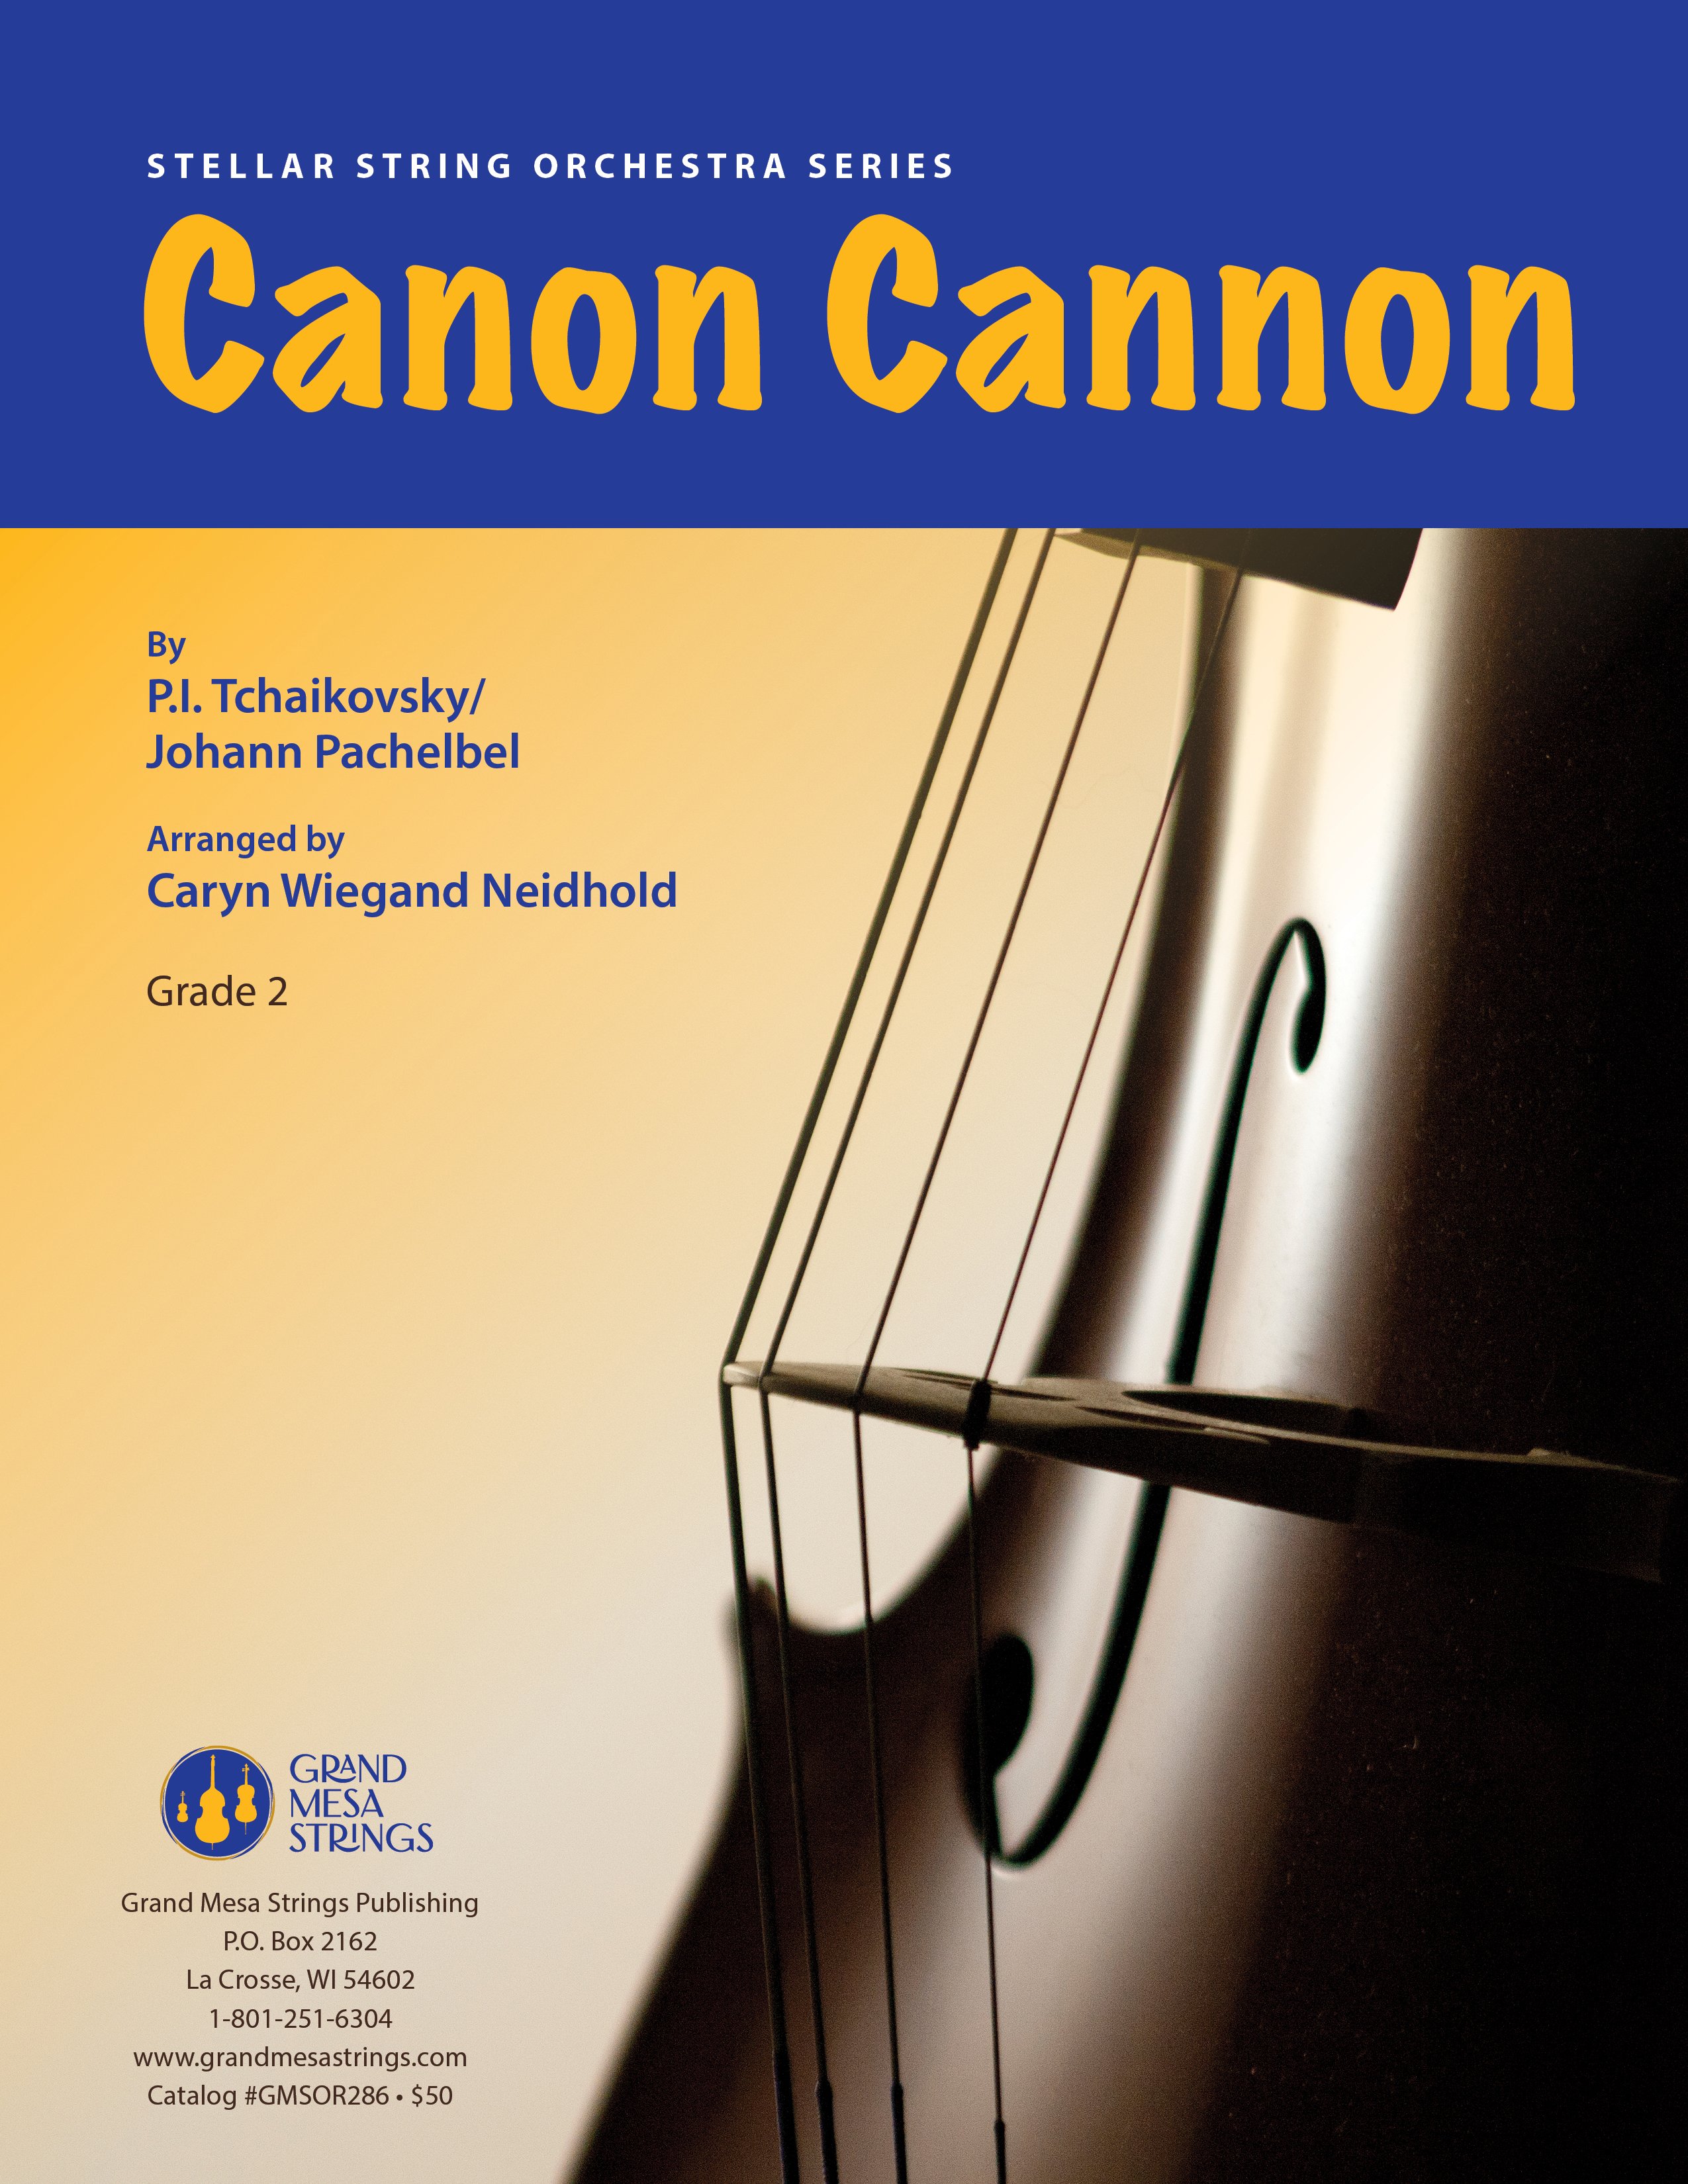 Canon Cannon orchestra sheet music cover